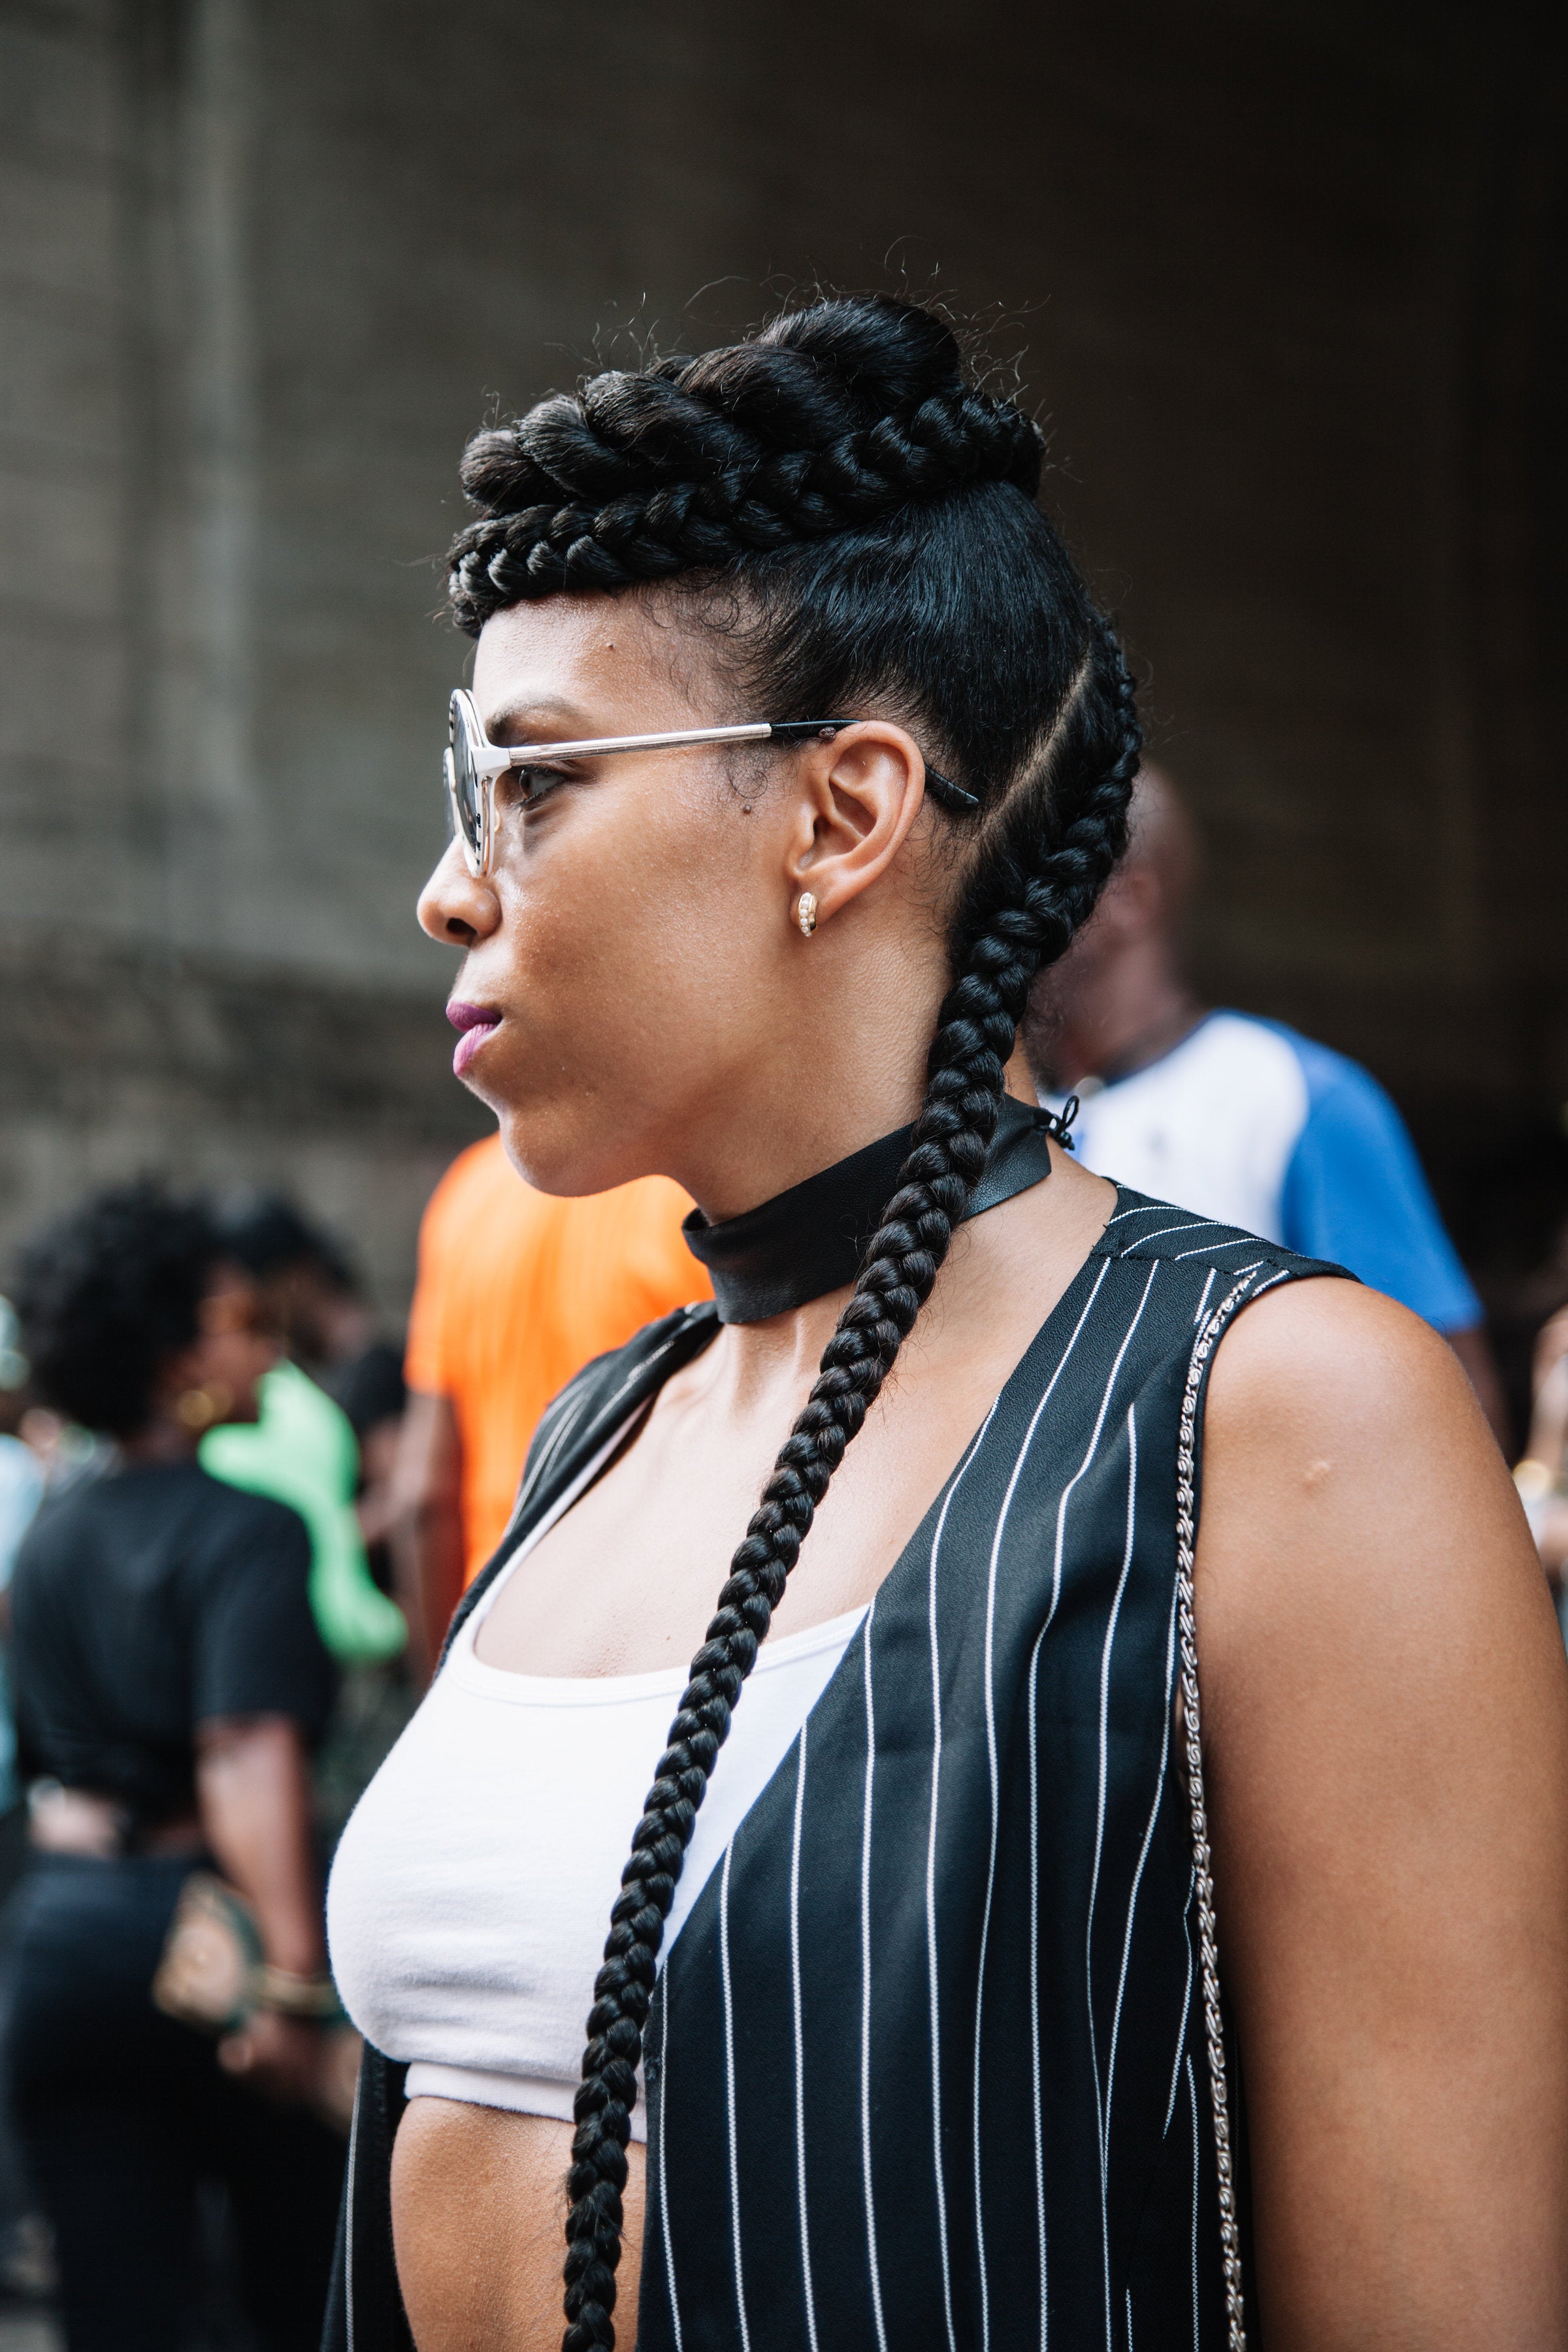 The Most Stunning Hair and Beauty Looks From The ESSENCE Street Style Block Party
